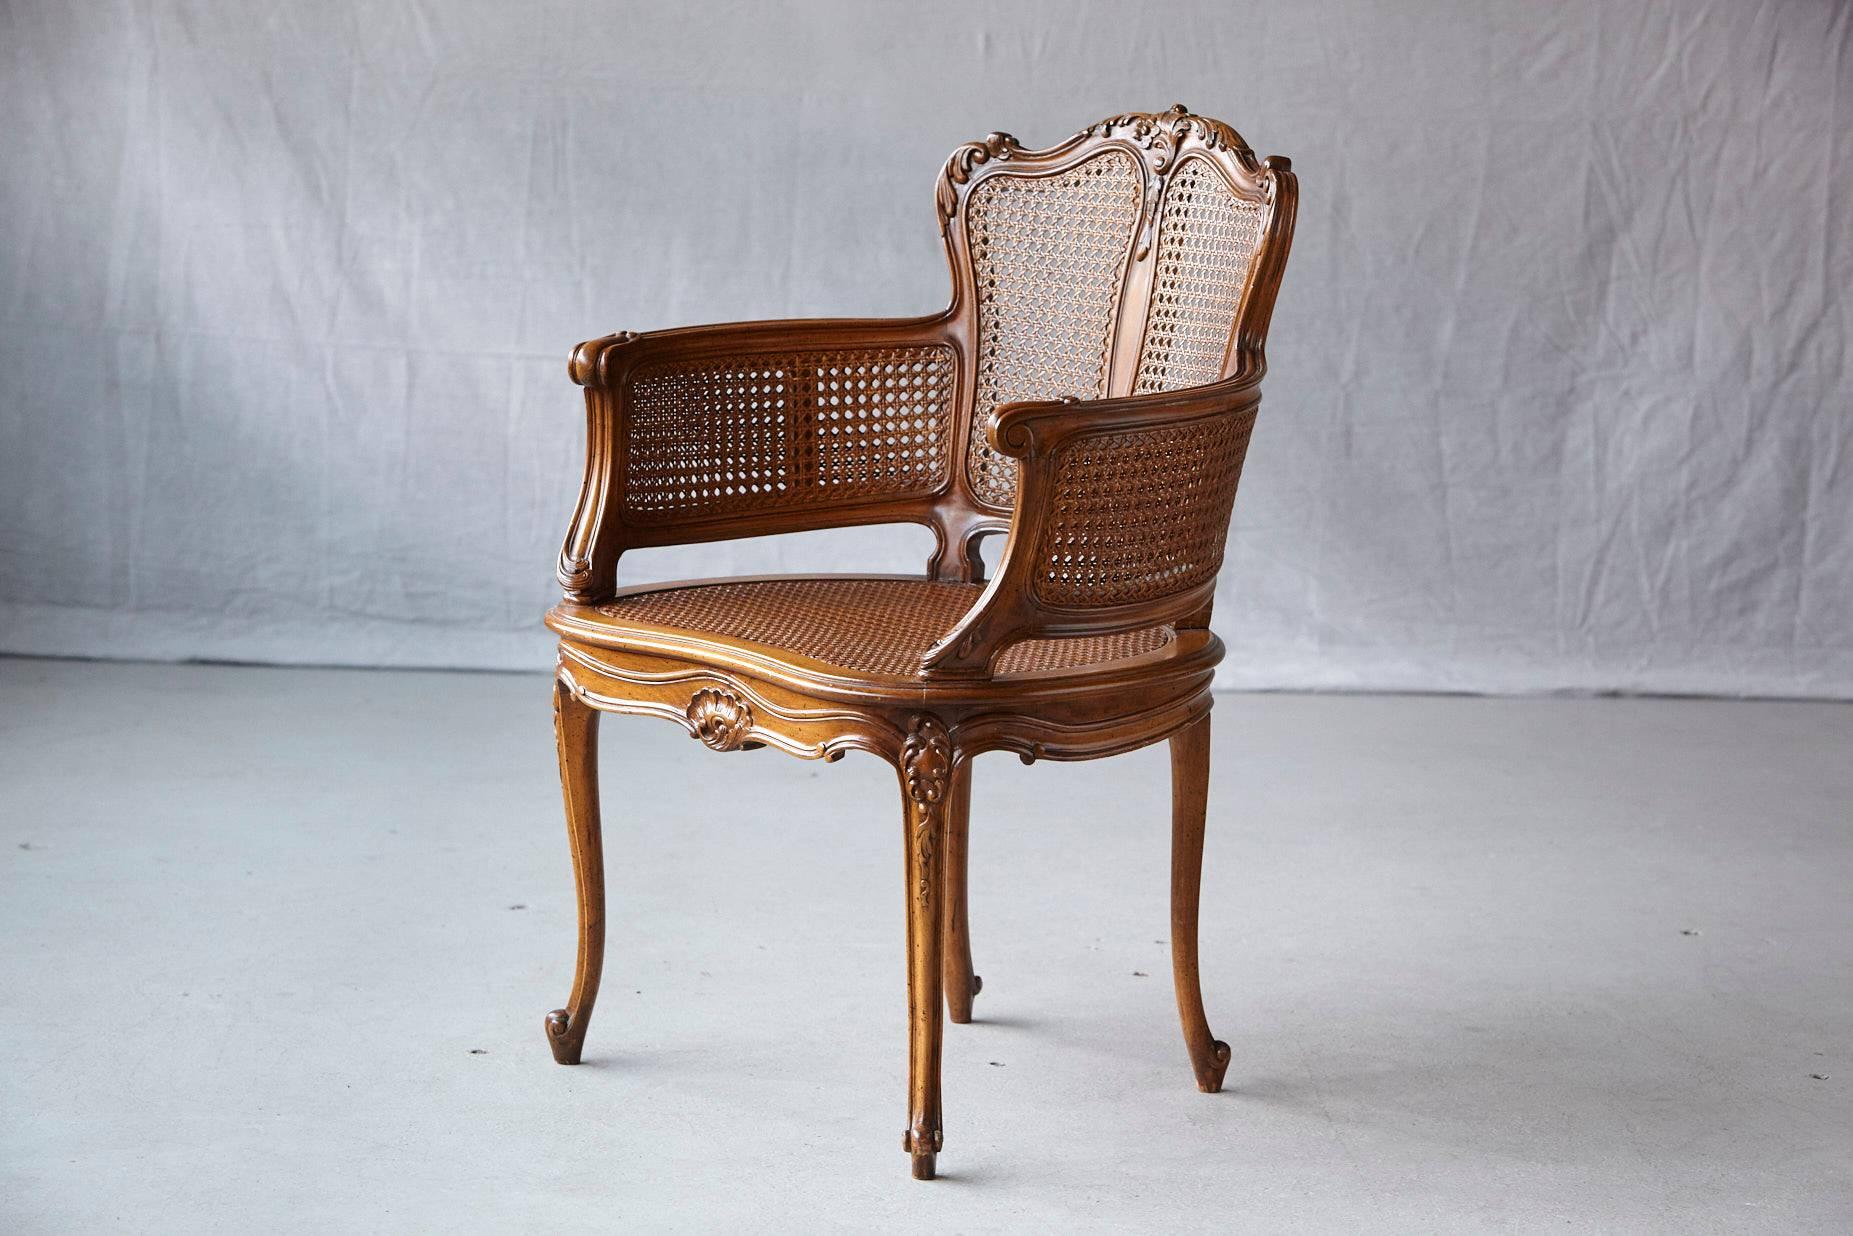 French Early 20th Century Rococo Style Caned Armchair with Elaborated Carvings